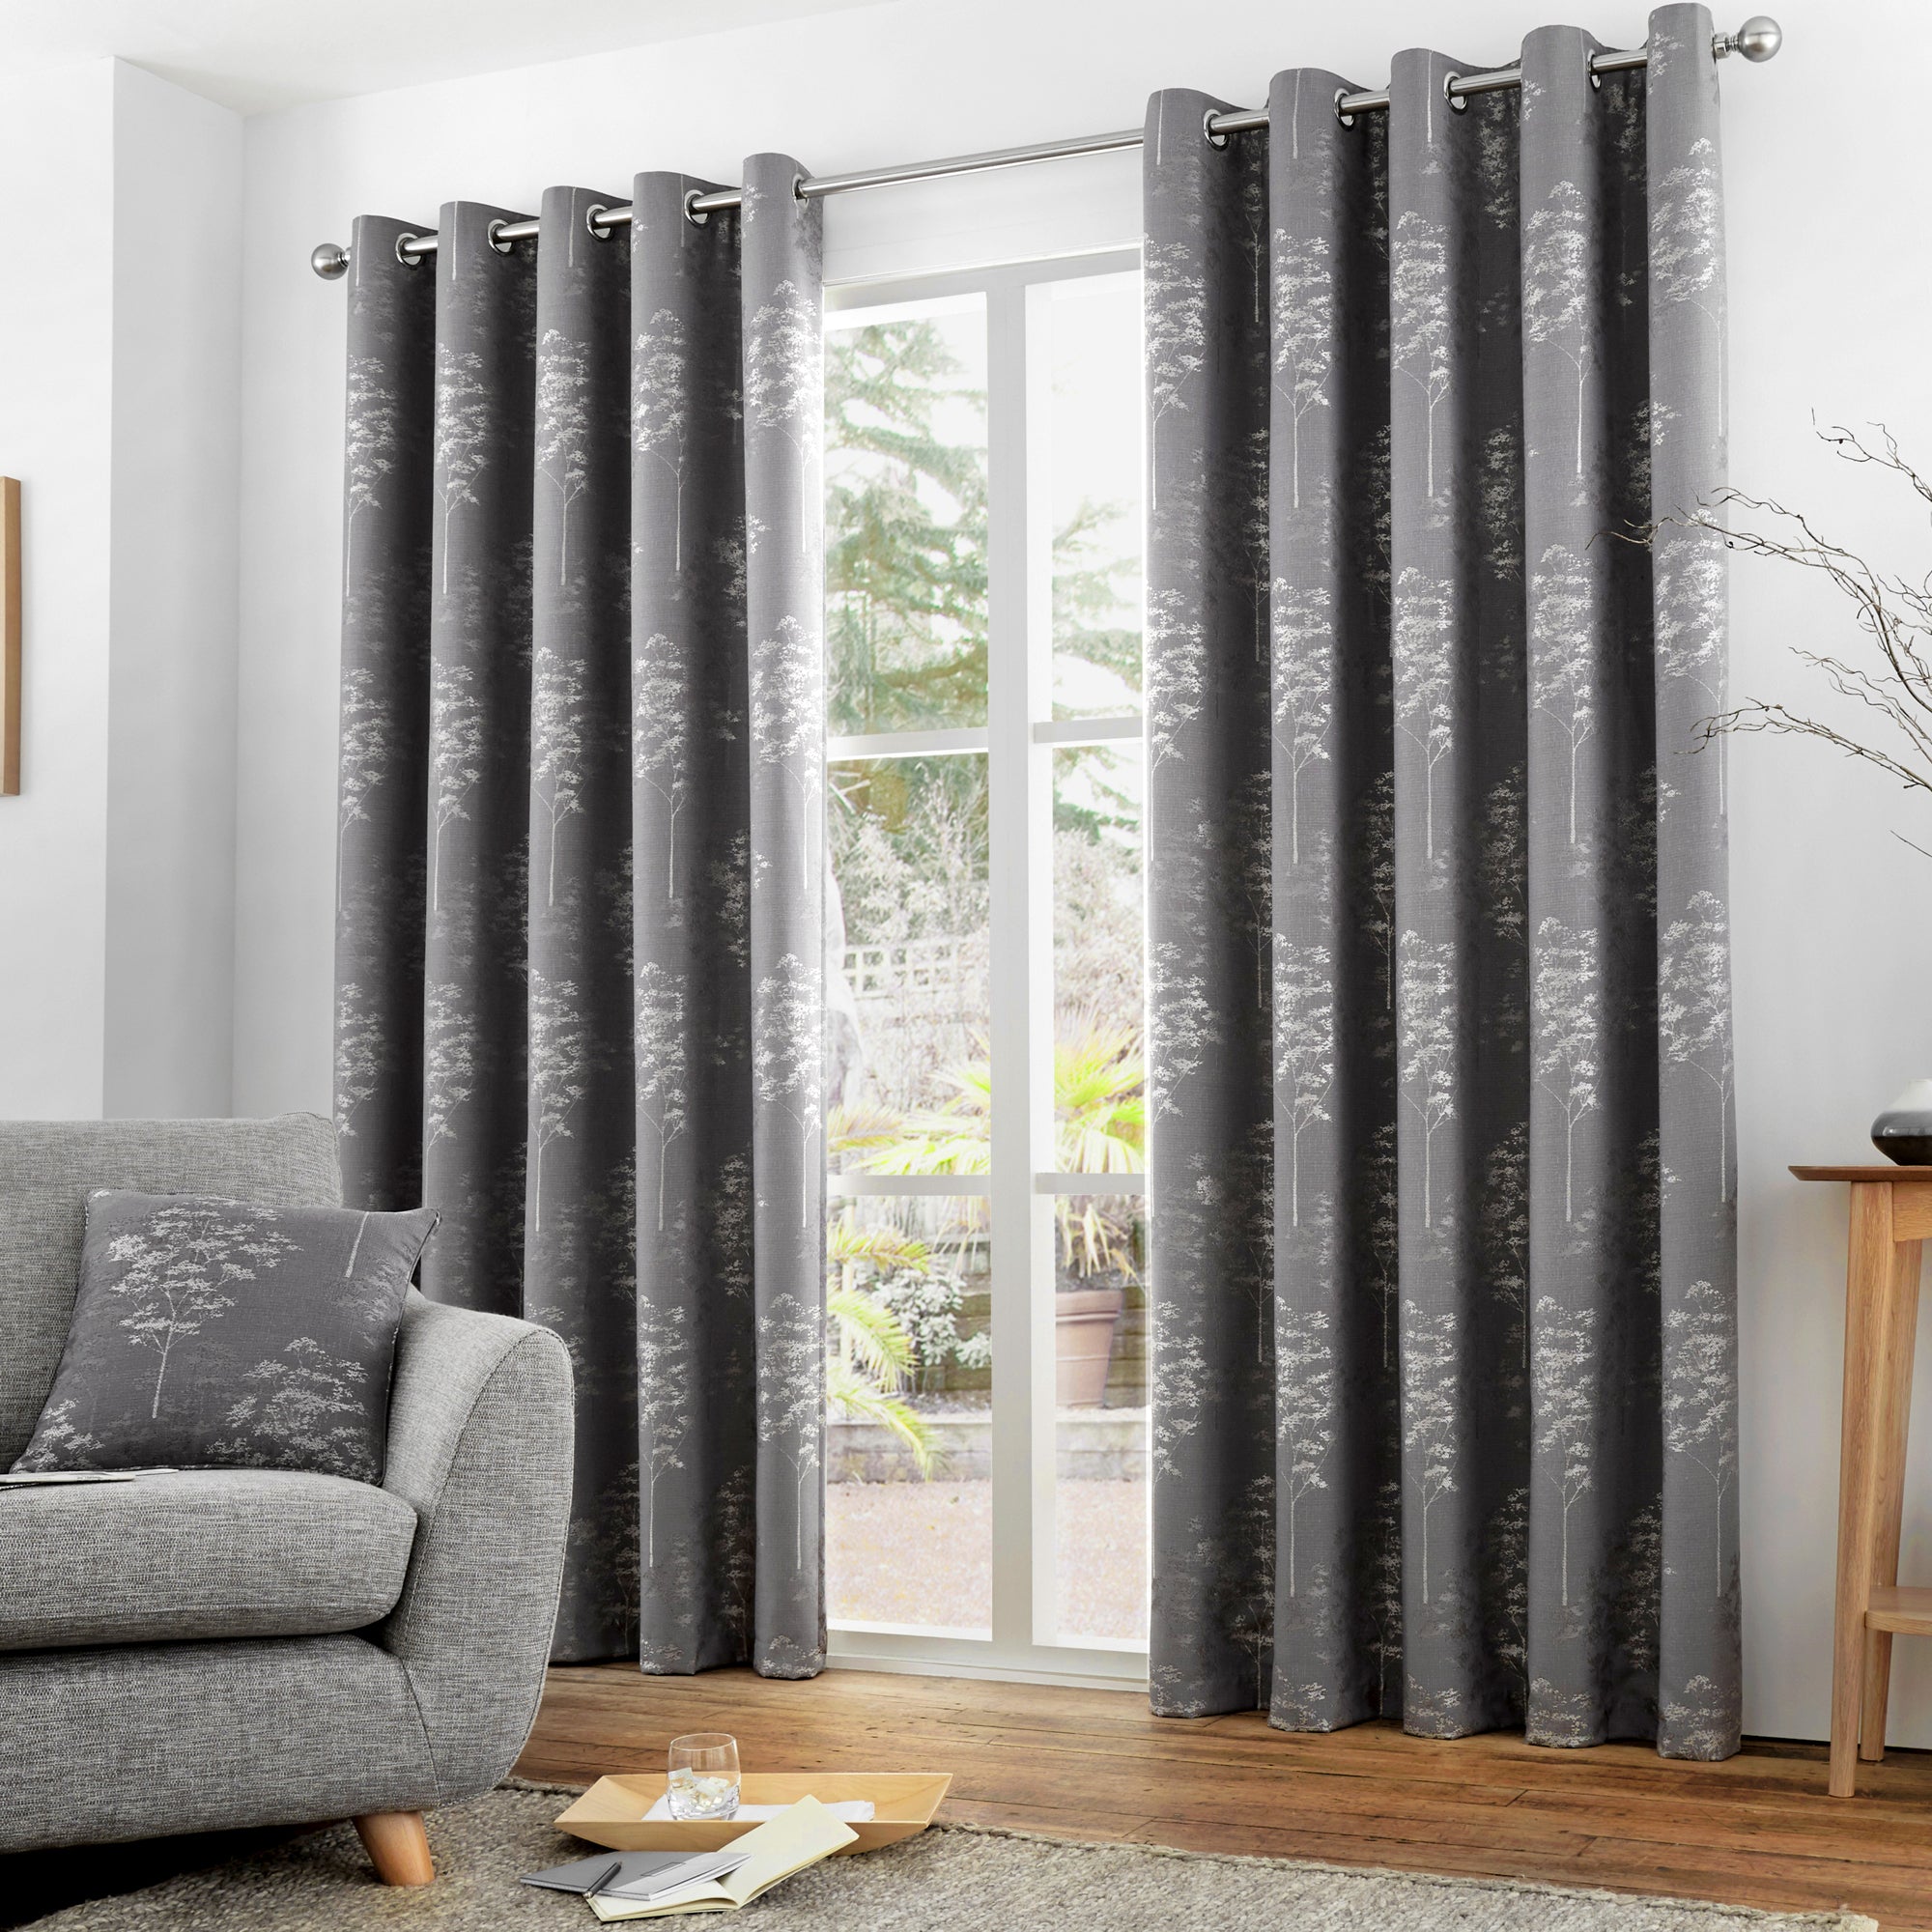 Elmwood - Lined Eyelet Curtains in Graphite by Curtina